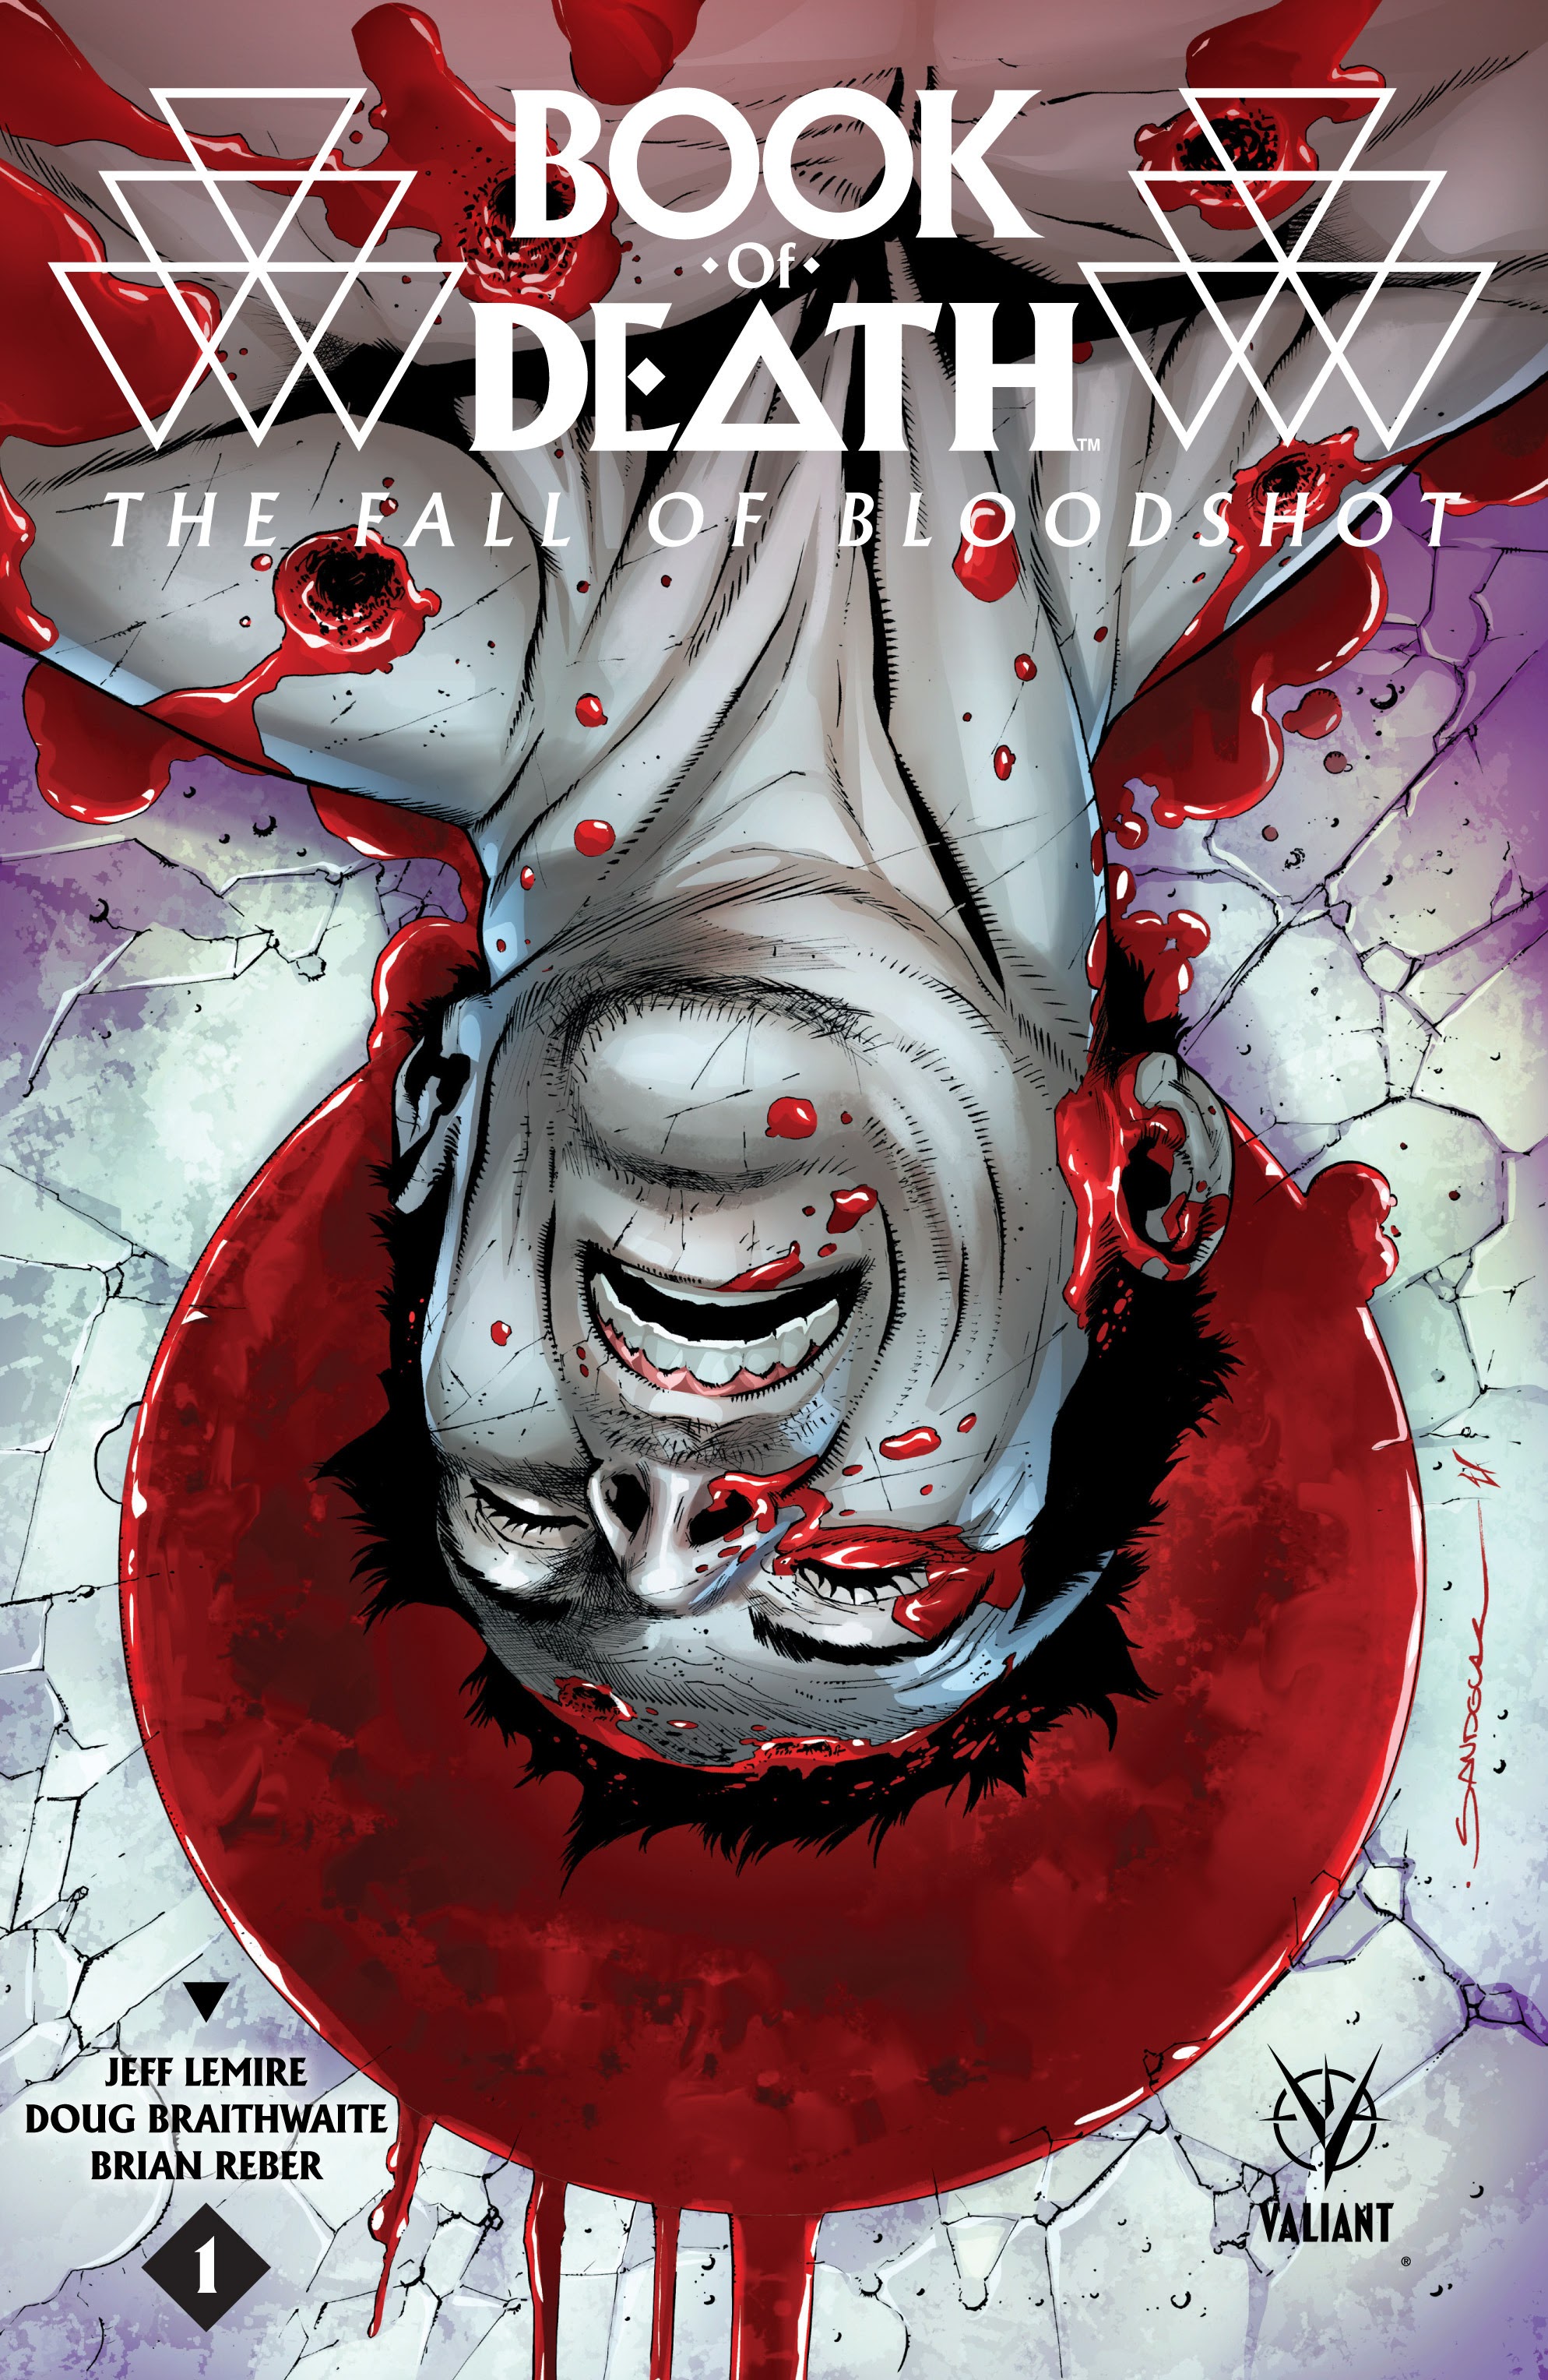 Read online Book of Death: Fall of Bloodshot comic -  Issue # Full - 1